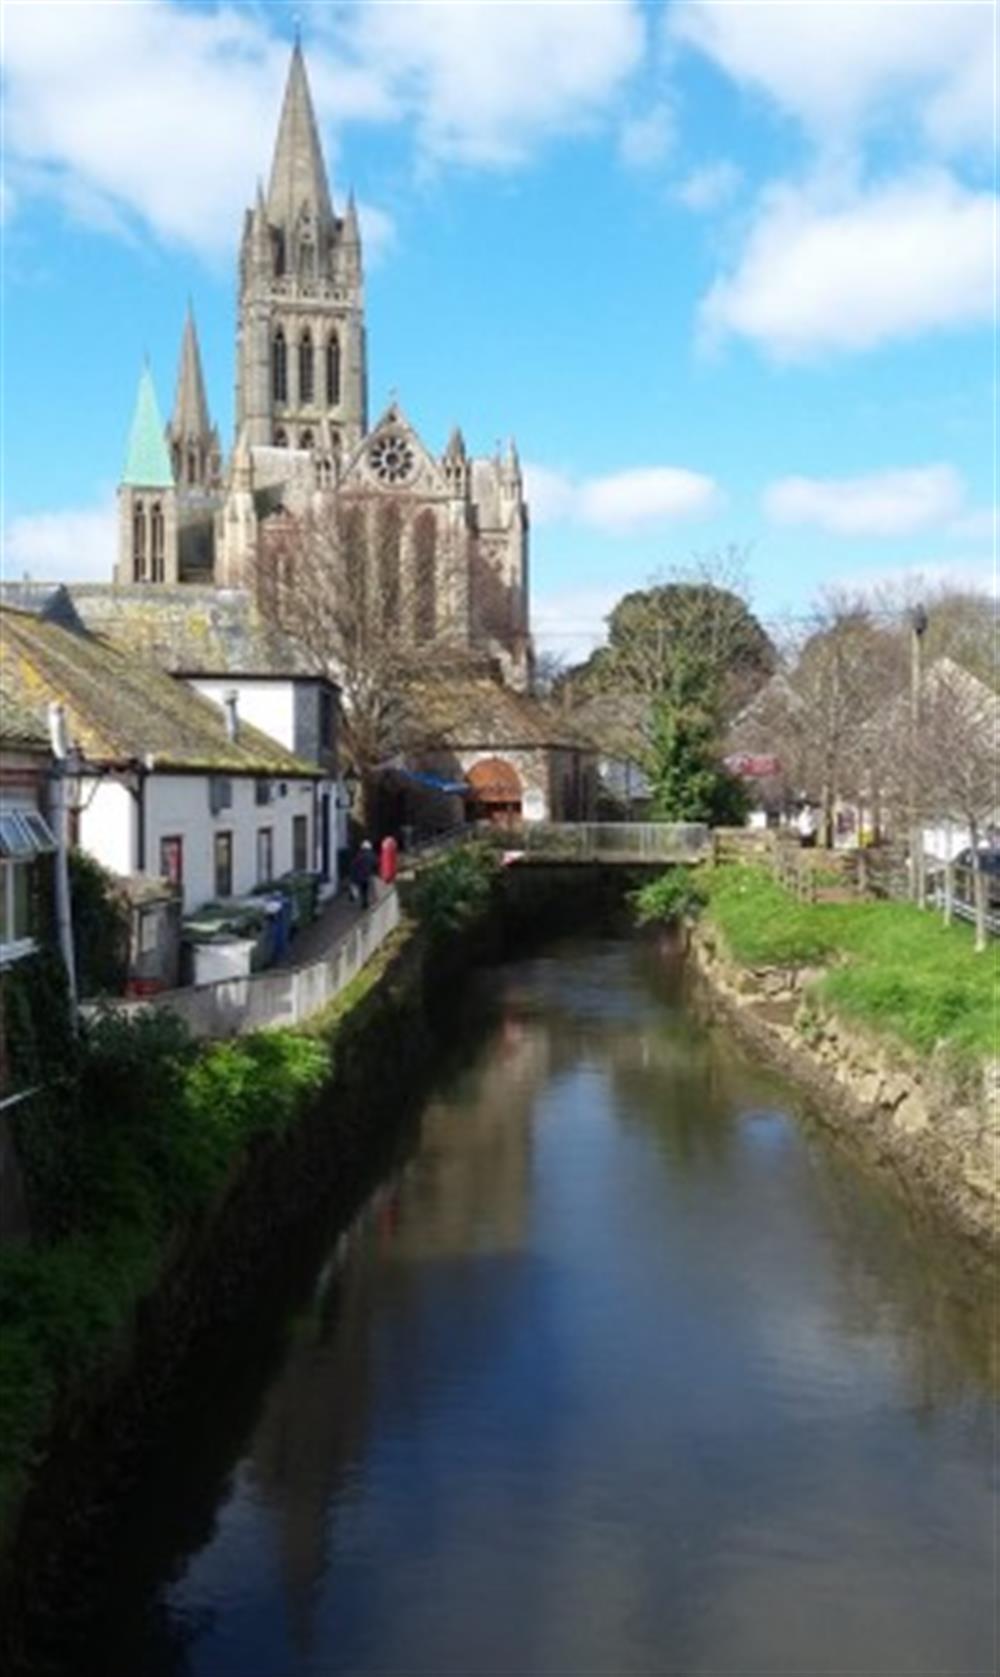 Truro is our main shopping centre, plus it has a cinema and plenty of restaurants, pubs and cafes.